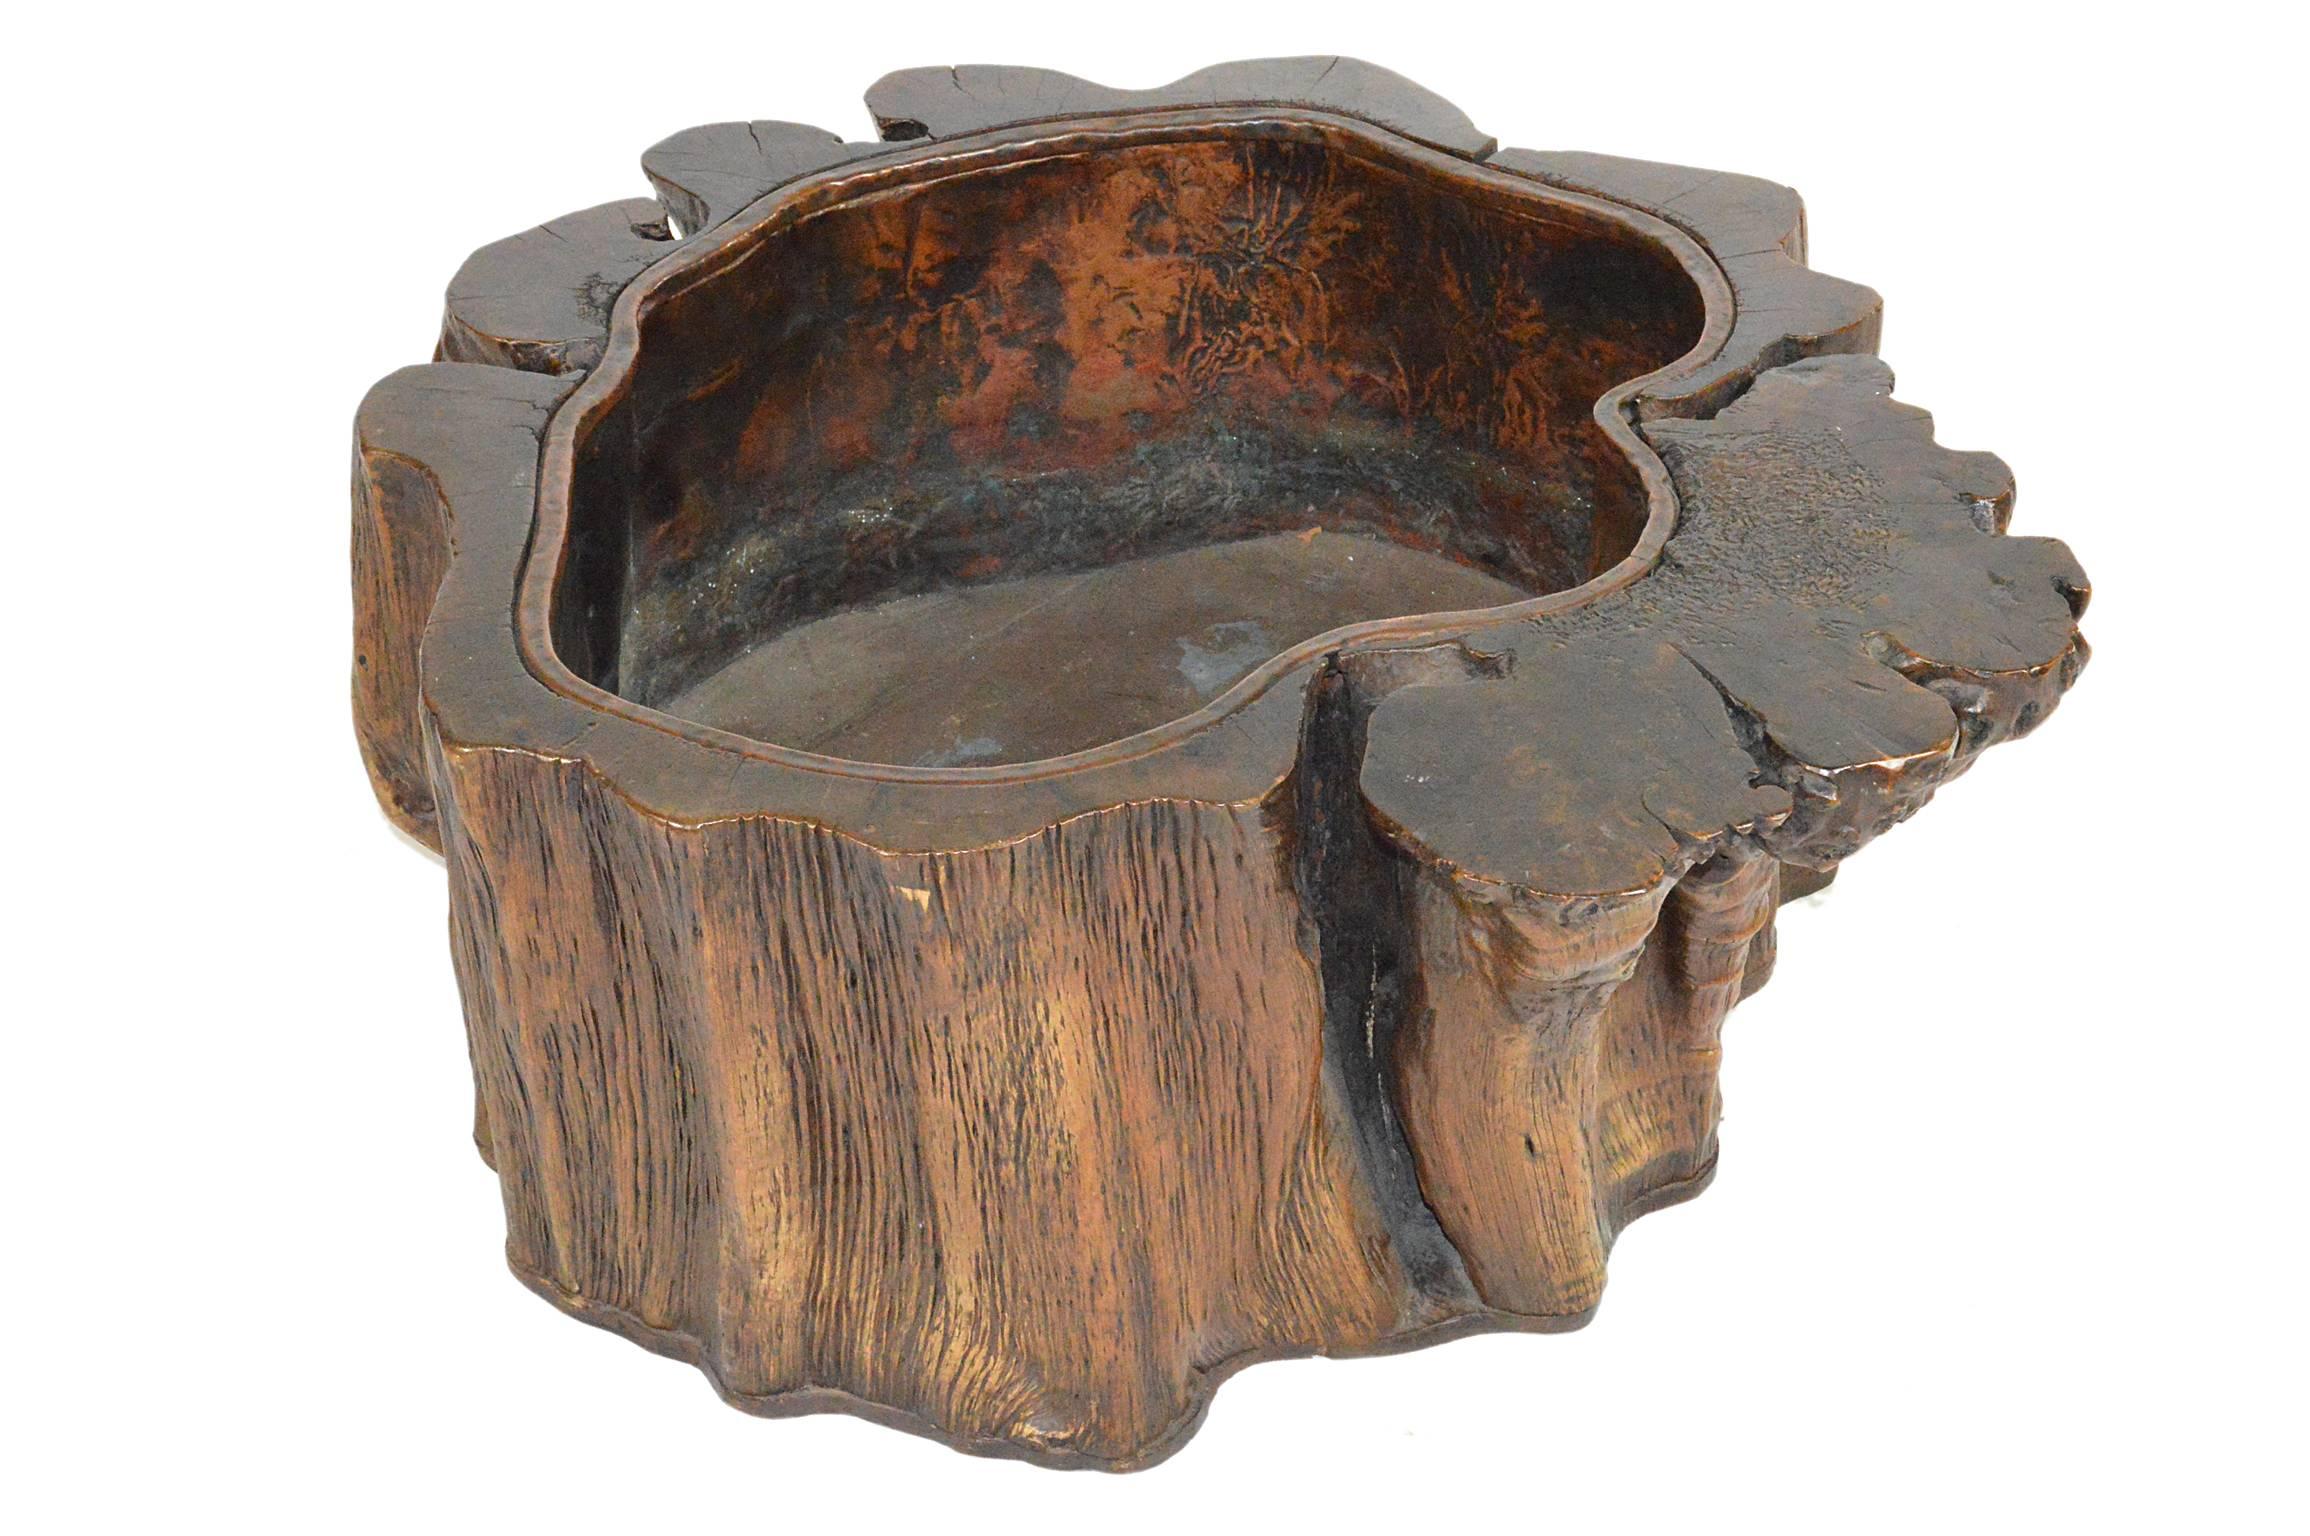 Japanese Meiji period hollowed tree trunk jardinière with a dark brown twisted trunk with a confirming copper metal liner.